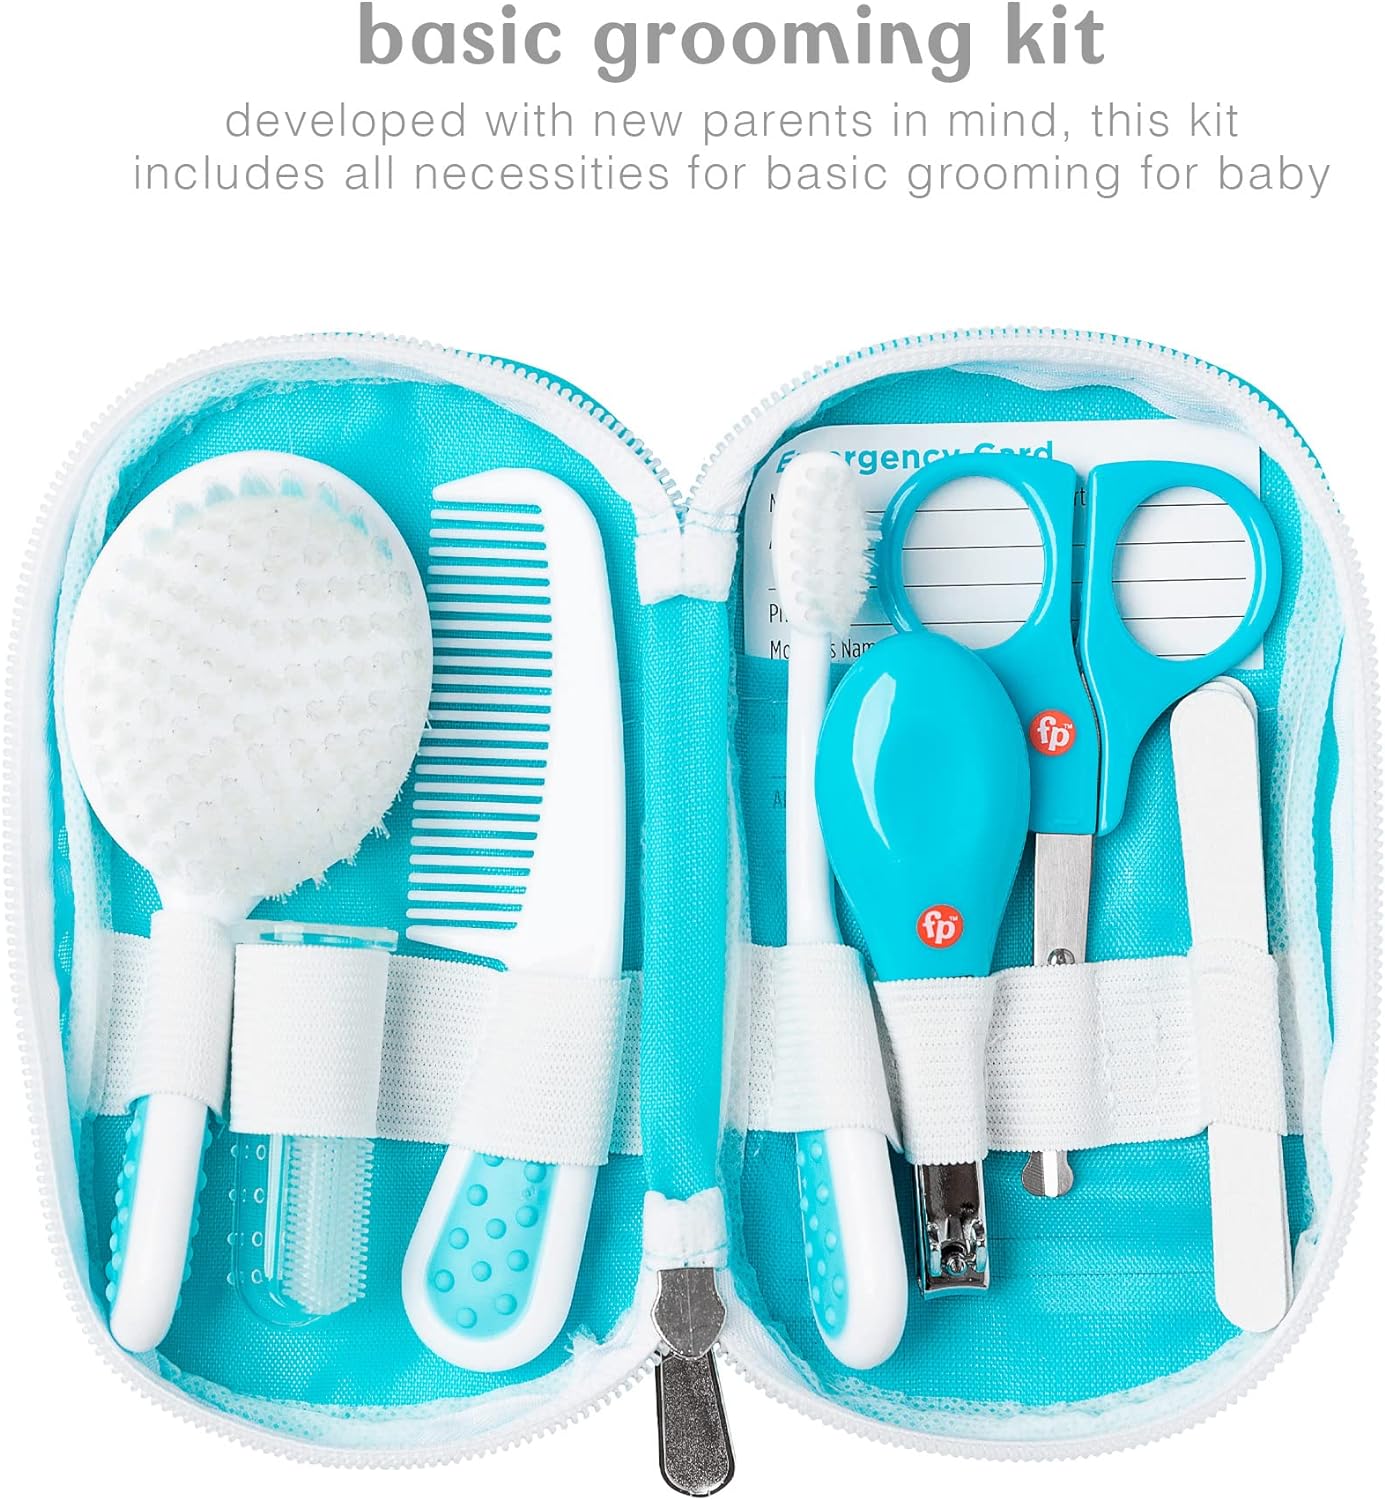 Fisher-Price Baby Grooming Kit for Newborns, 12 Pieces, 0+ Months - image 2 of 6